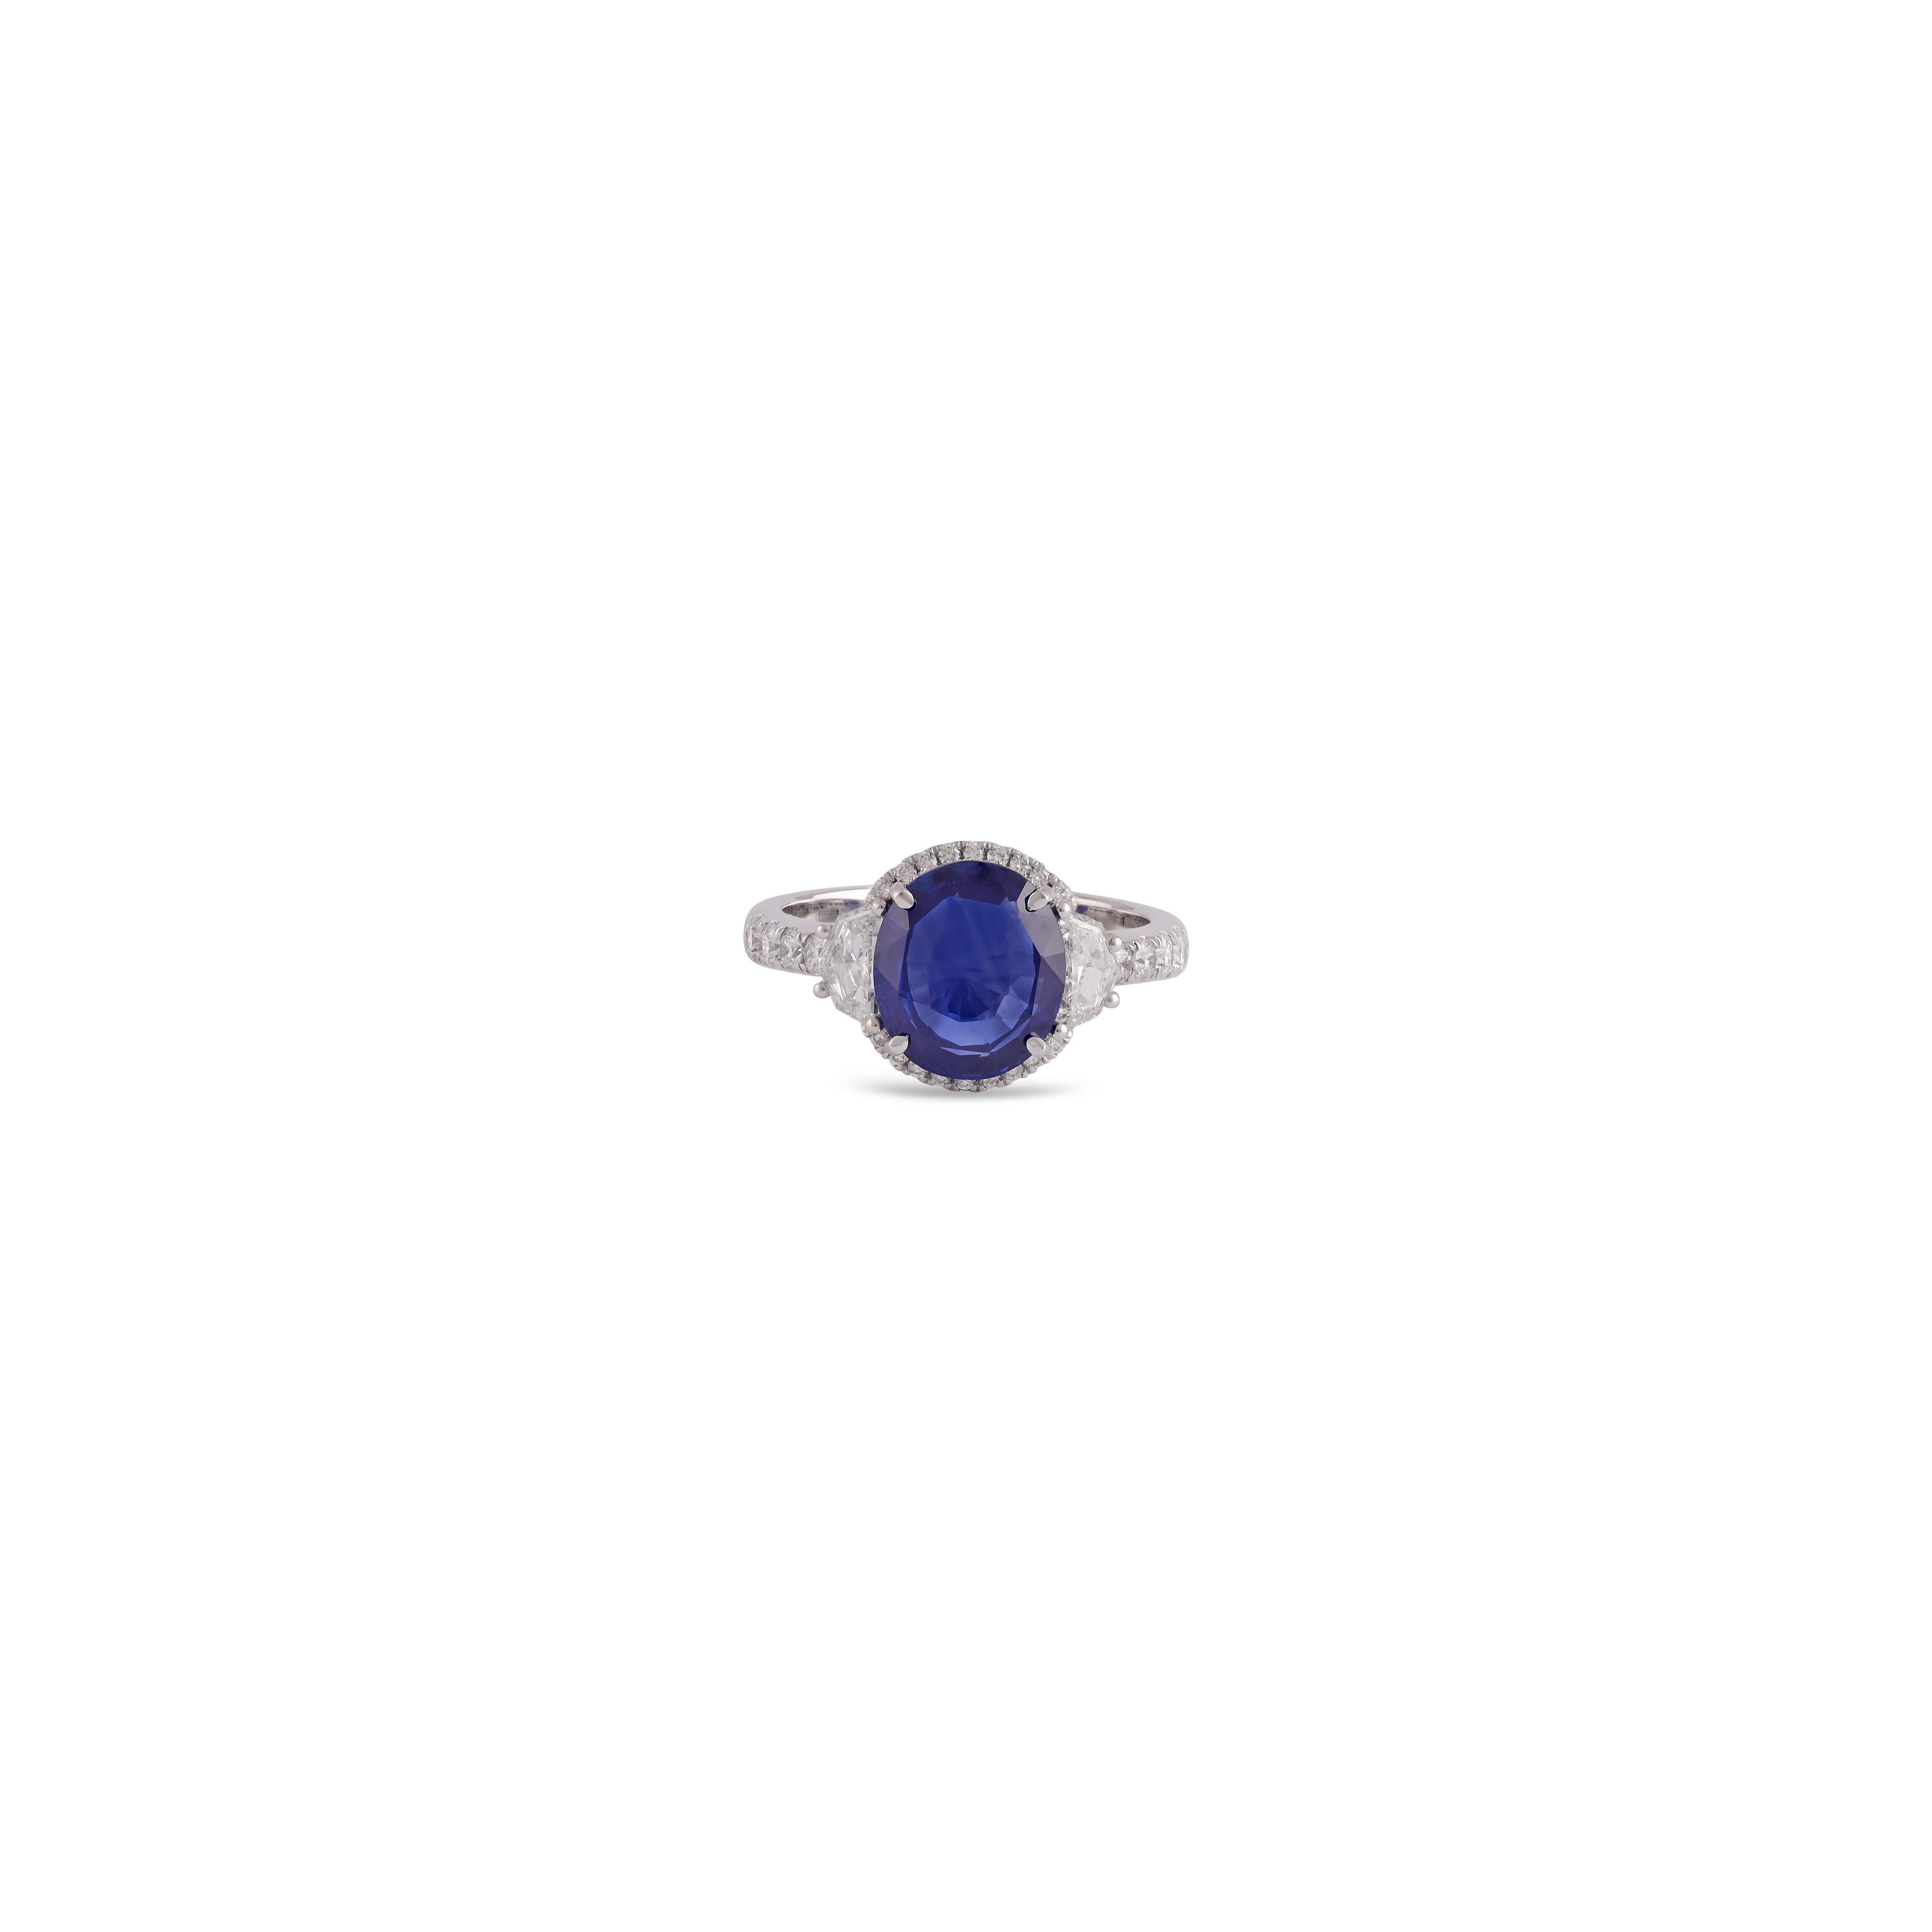 Its an exclusive  High Value Clear Blue Sapphire & diamond ring studded in 18k White gold with 1 piece of Sapphire weight 3.54 carat with 40 pieces of diamonds weight 0.96 carat this entire ring is studded in 18k White gold , ring size can be change